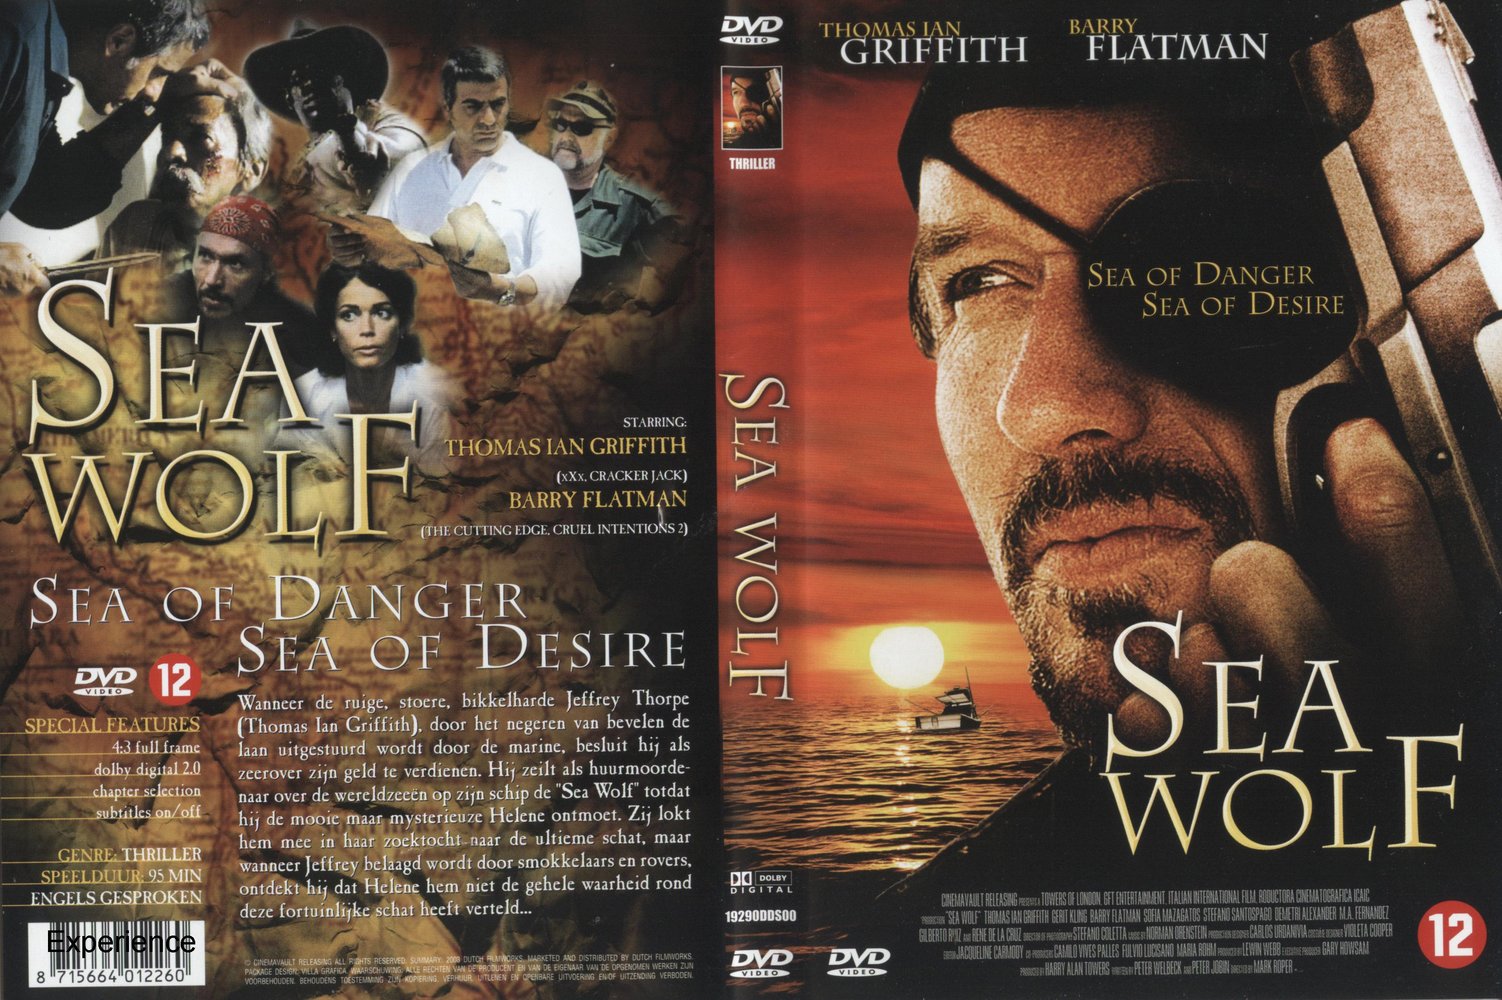 Jaquette DVD Sea wolf